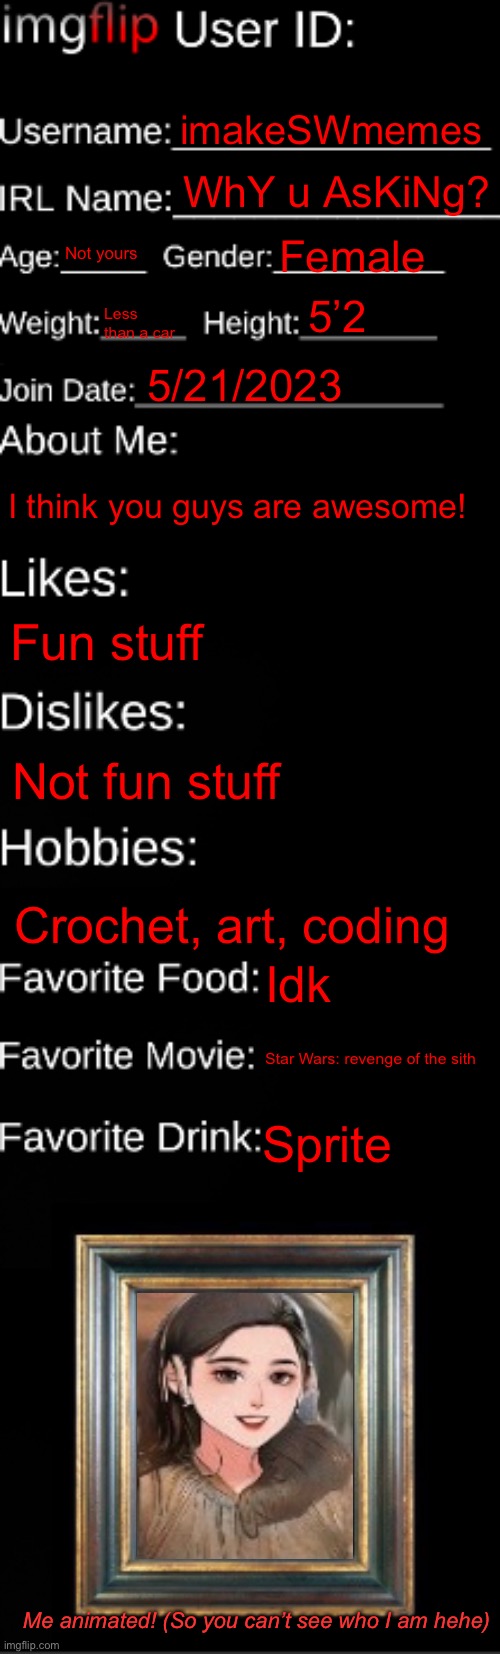 Me | imakeSWmemes; WhY u AsKiNg? Not yours; Female; 5’2; Less than a car; 5/21/2023; I think you guys are awesome! Fun stuff; Not fun stuff; Crochet, art, coding; Idk; Star Wars: revenge of the sith; Sprite; Me animated! (So you can’t see who I am hehe) | image tagged in imgflip id card | made w/ Imgflip meme maker